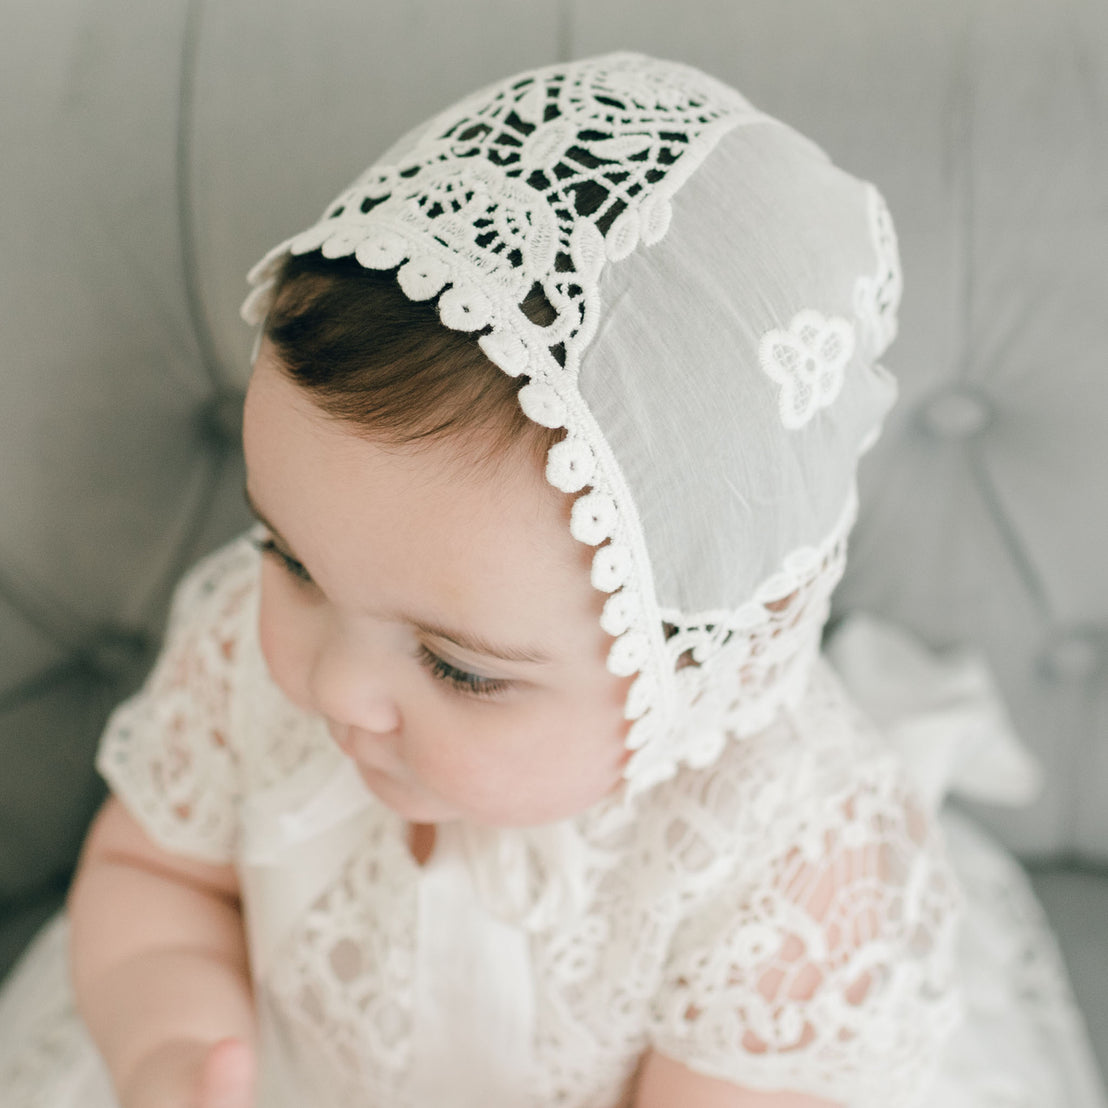 A serene baby wearing the Grace Christening Gown & Bonnet, with a Venice inset and a silk sash tie, sitting on a grey textured background, gazing down thoughtfully.